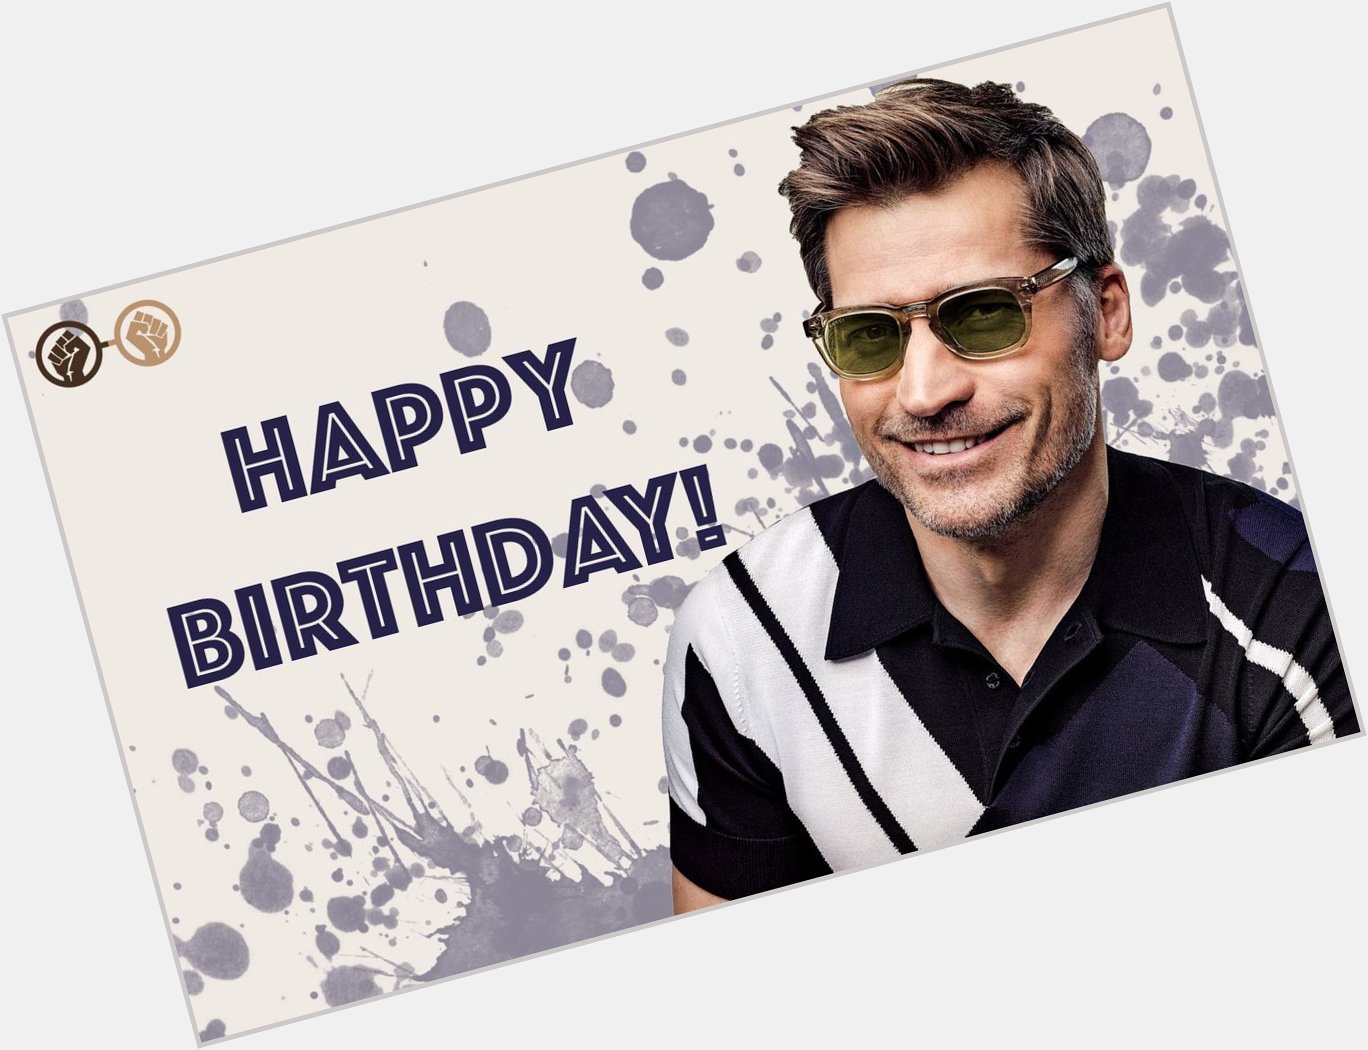 Happy birthday, Nikolaj Coster-Waldau! The \Game of Thrones\ actor turns 48 today. We hope he\s having a good day! 